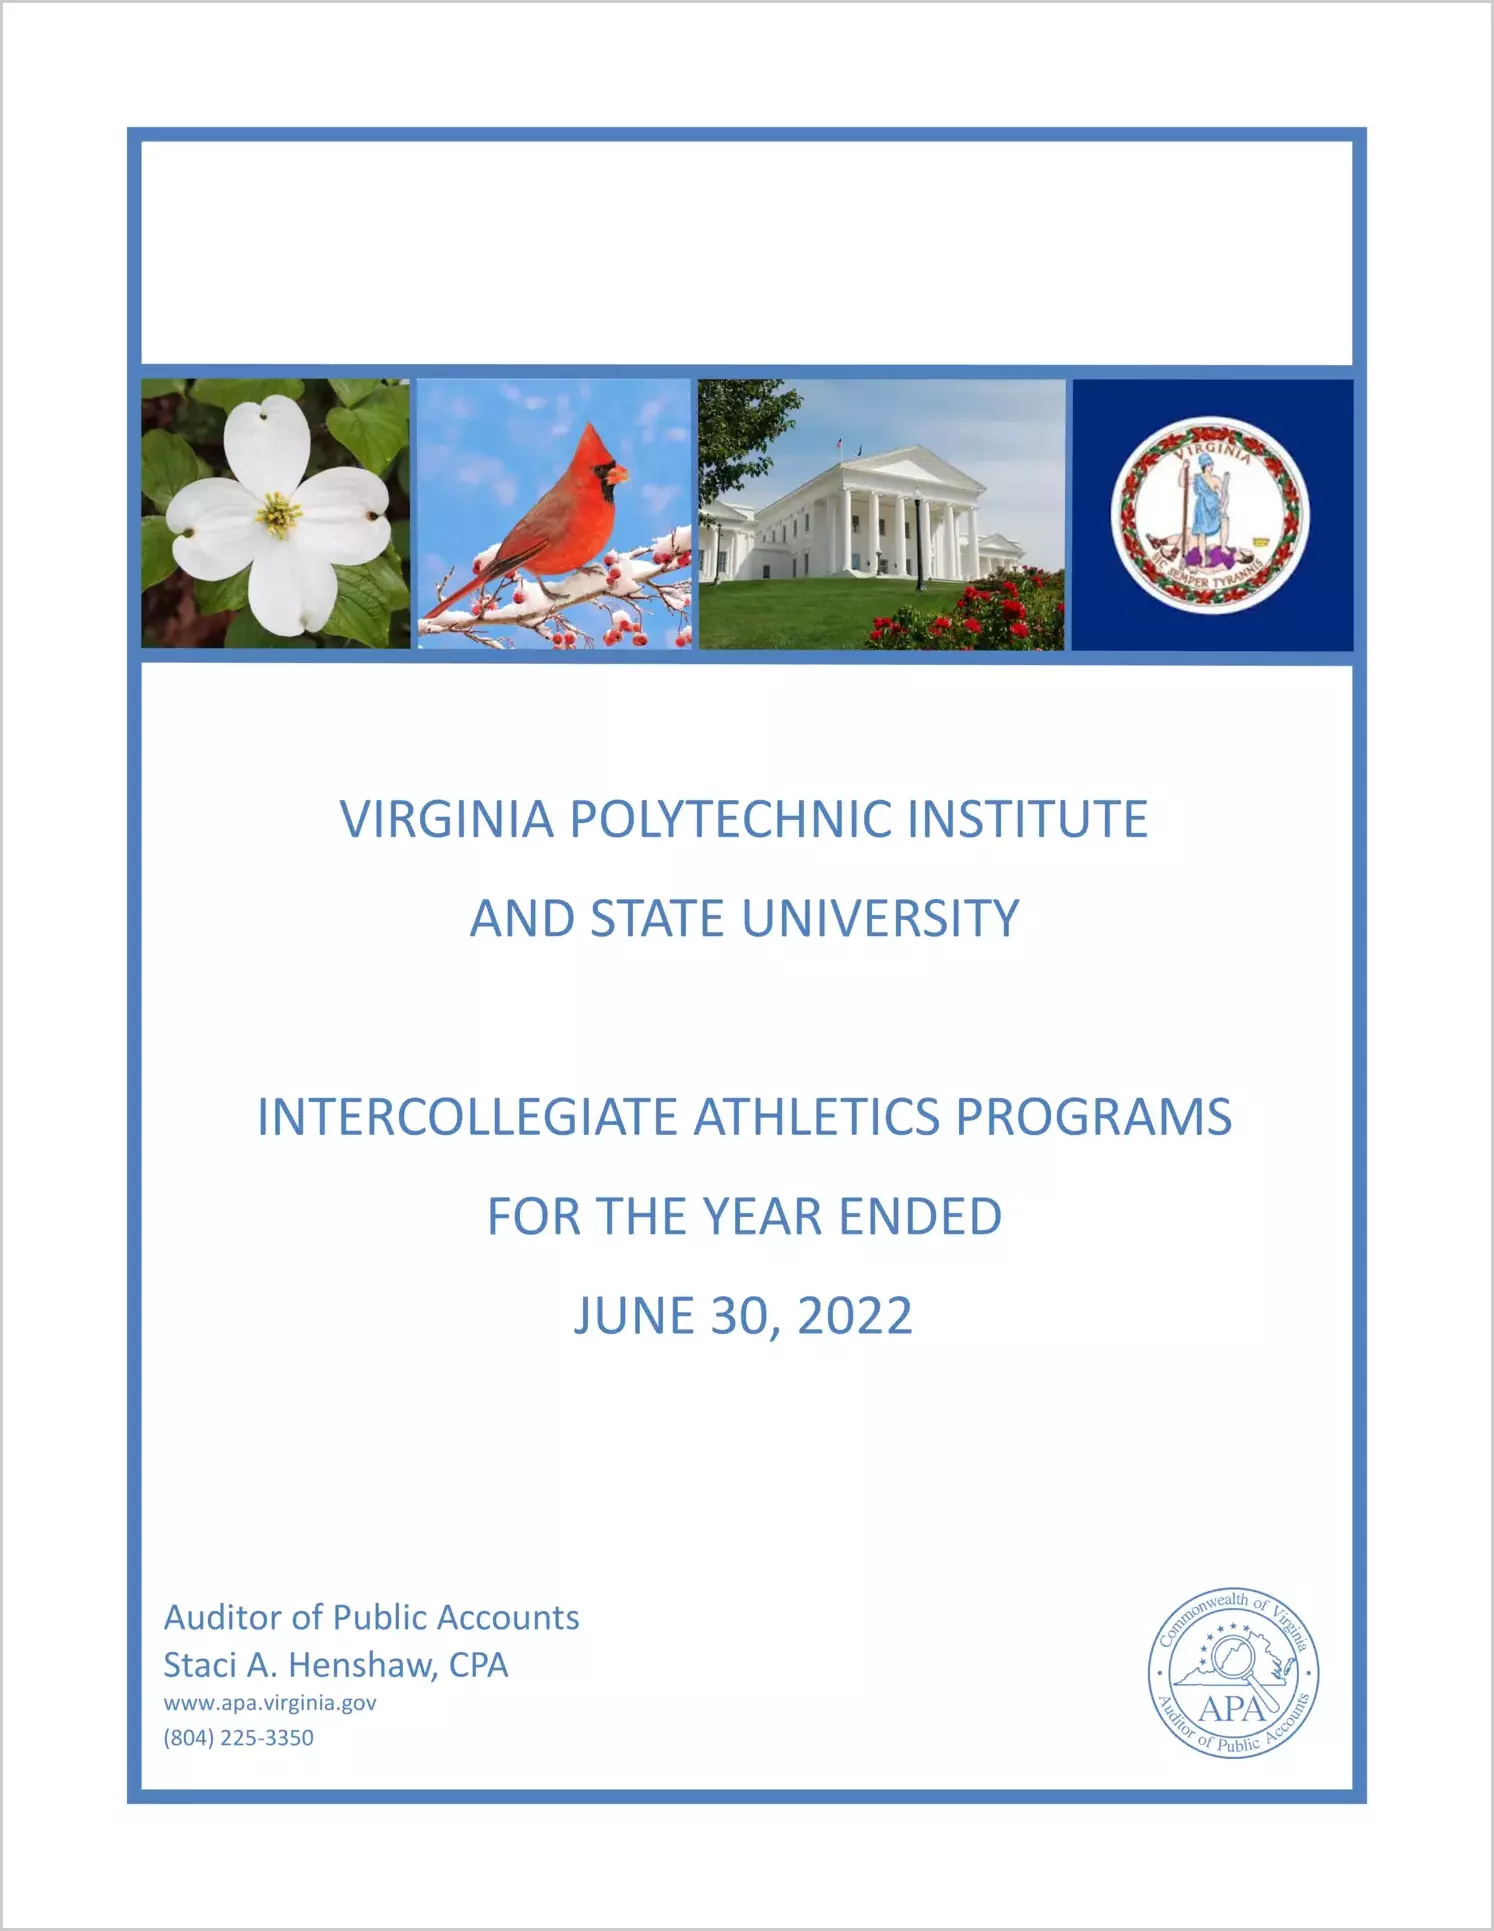 Virginia Polytechnic Institute and State University Intercollegiate Athletics Programs for the year ended June 30, 2022